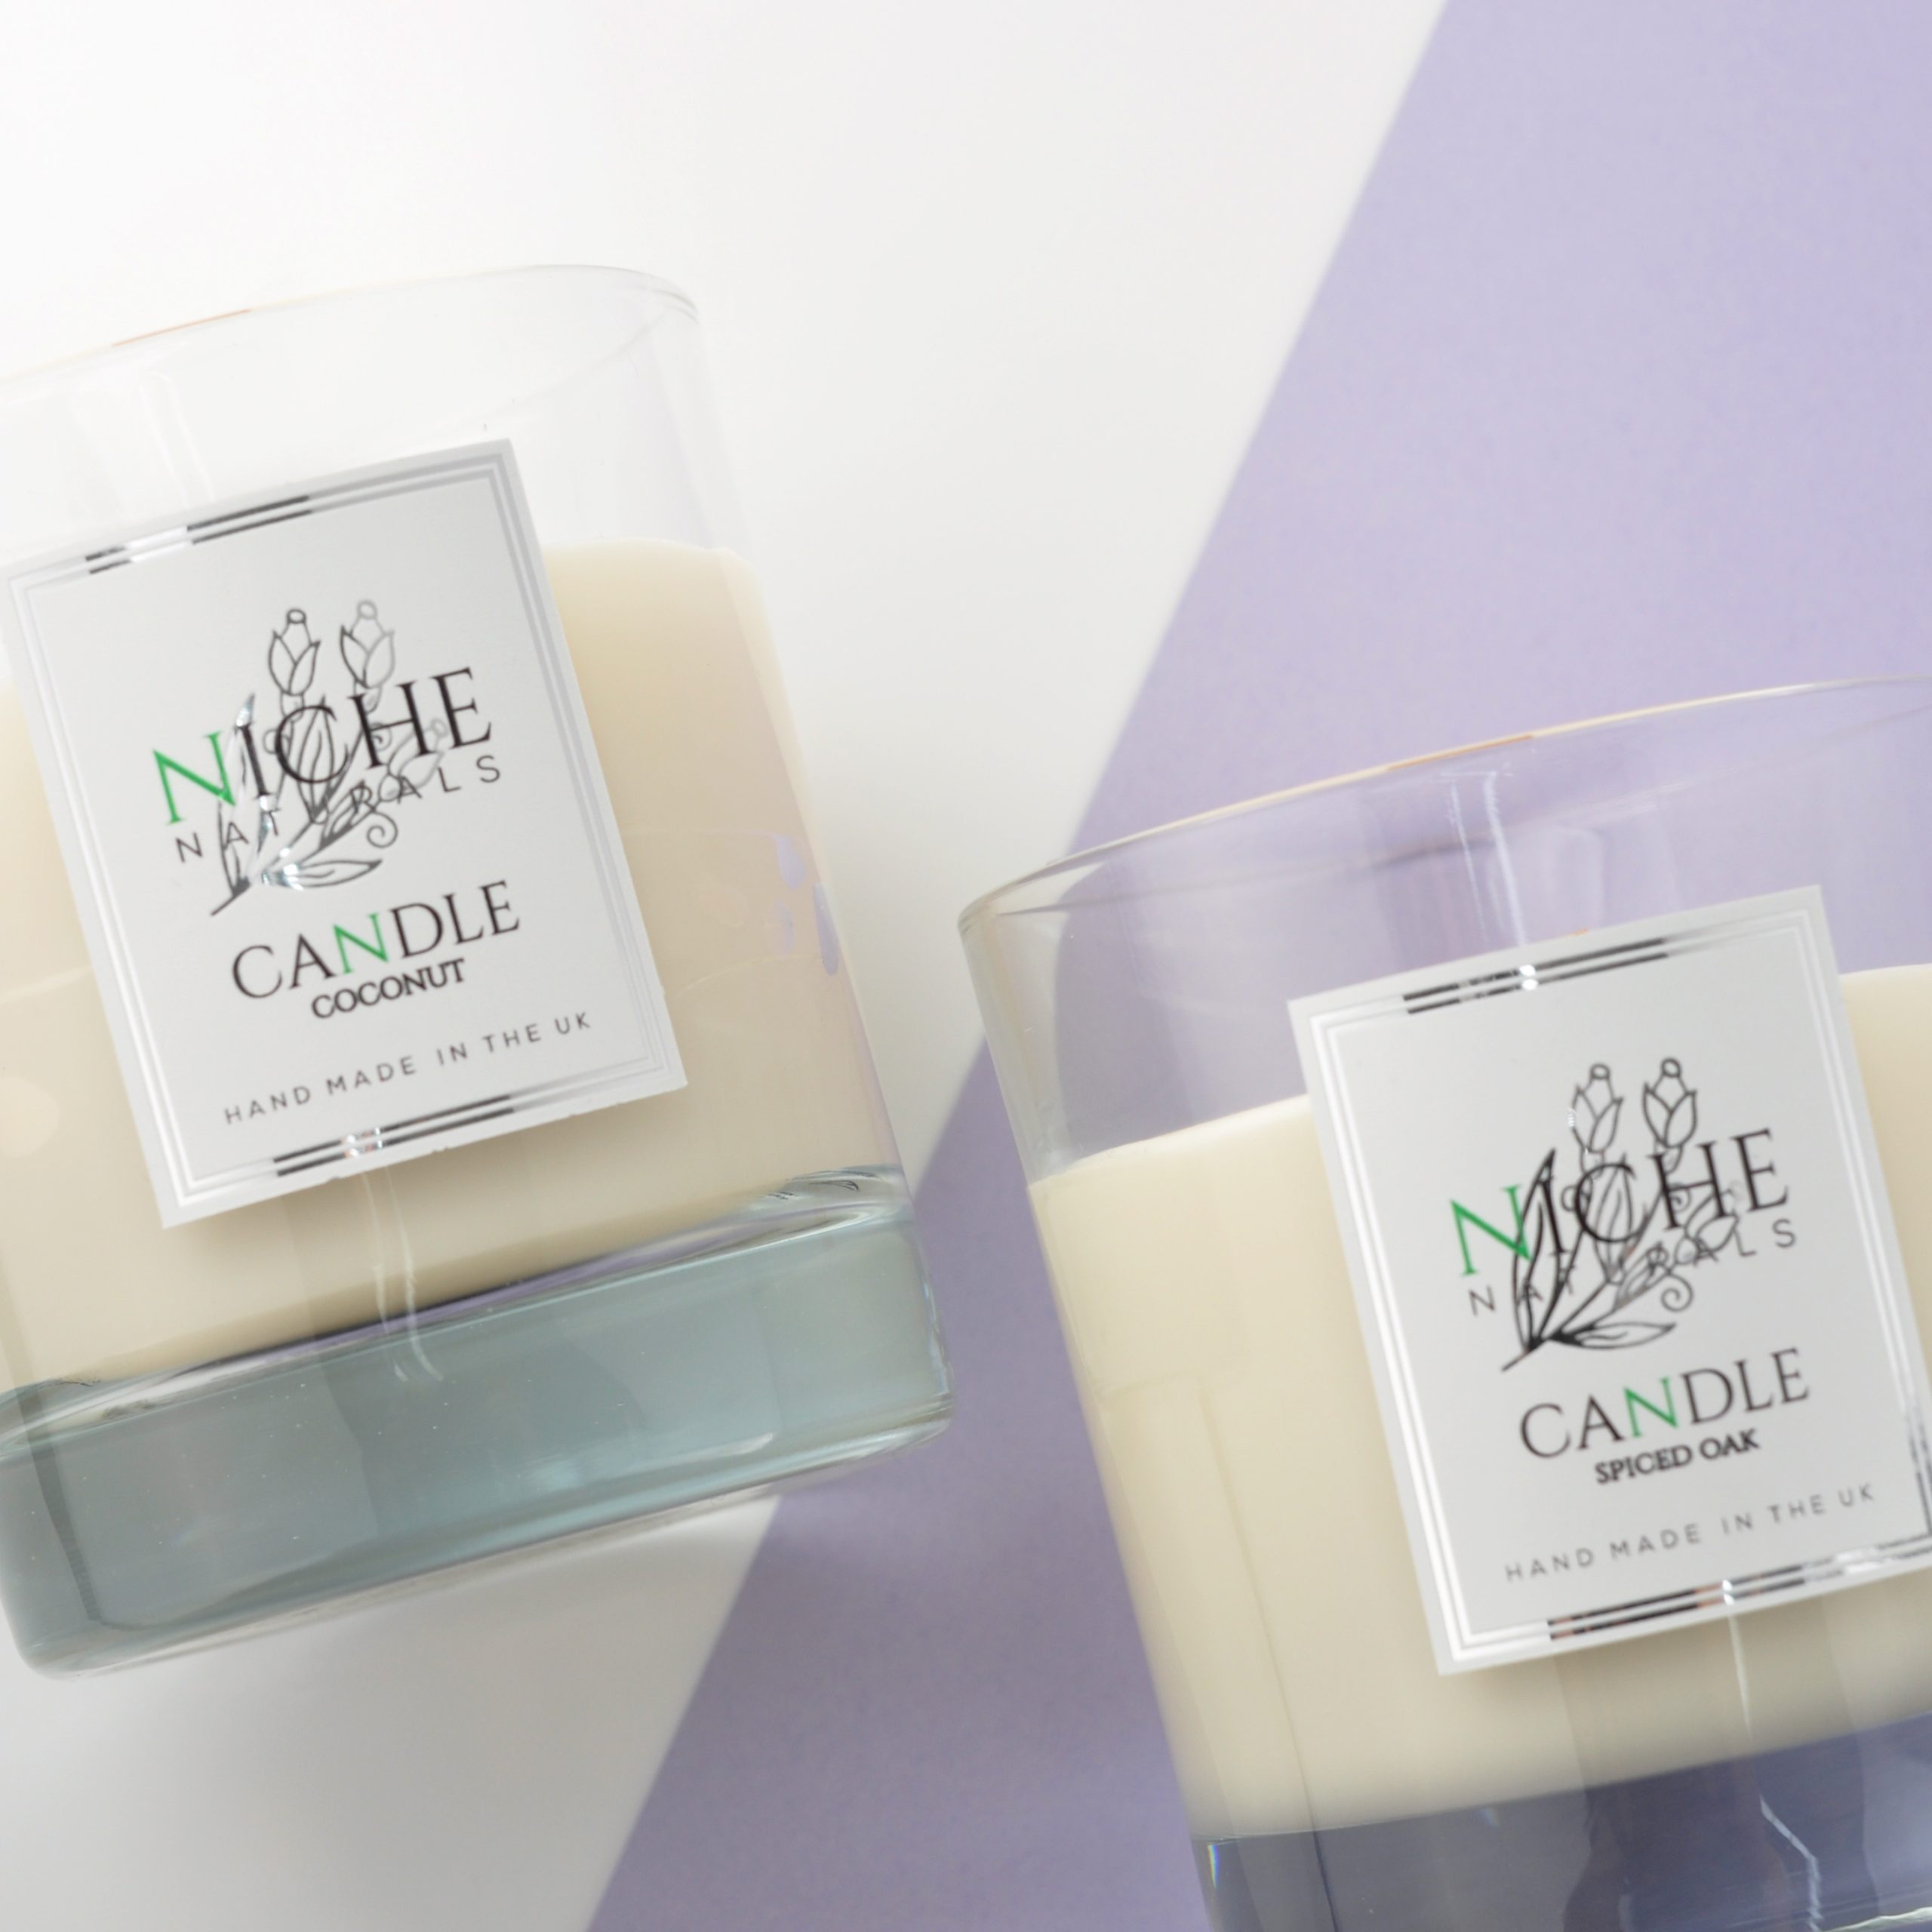 The Power Of Candles To Transform Your Home